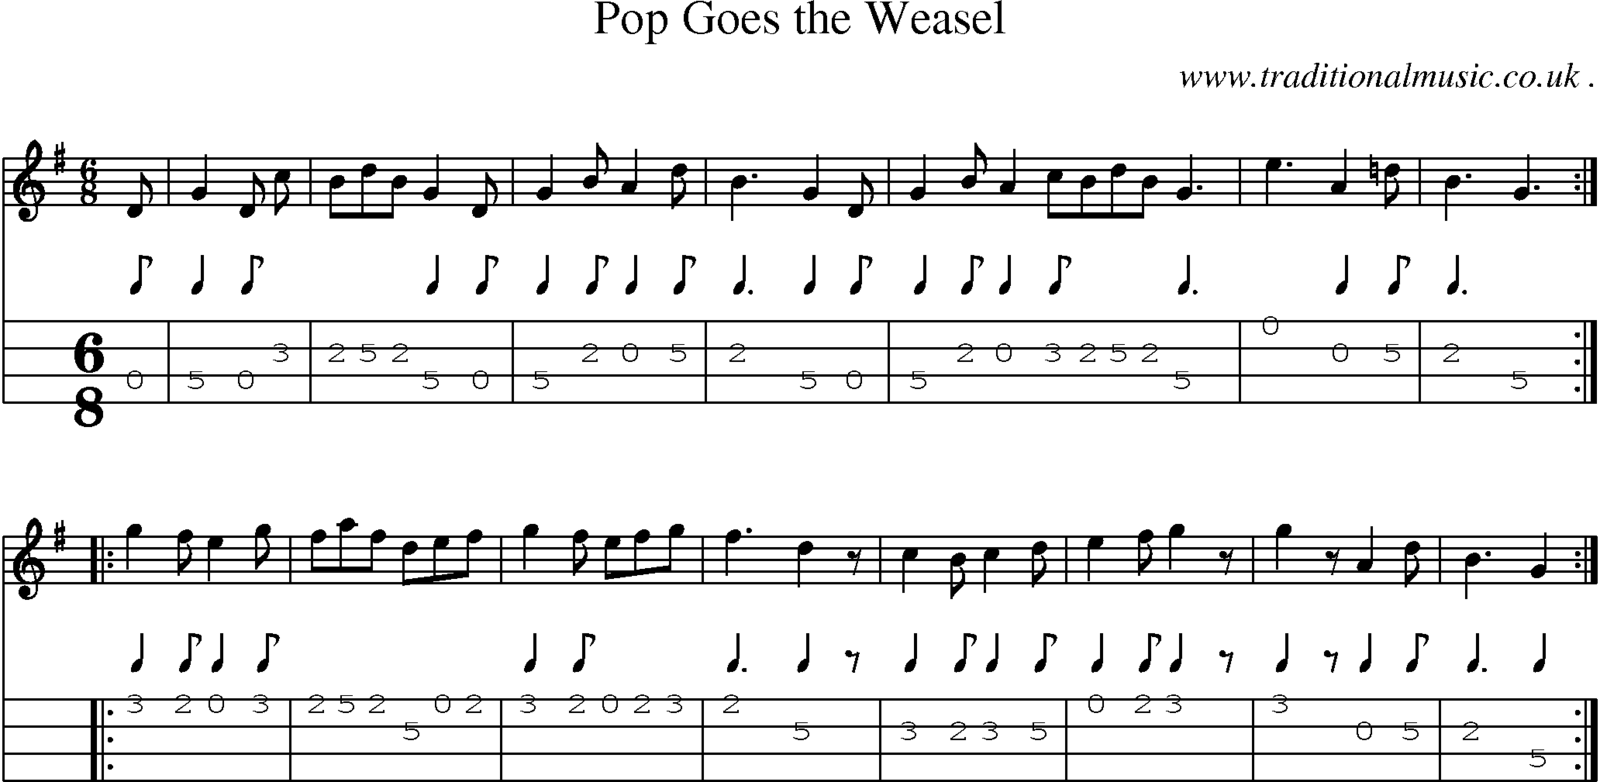 File:Pop Goes the Weasel - Sheet - 2.png.